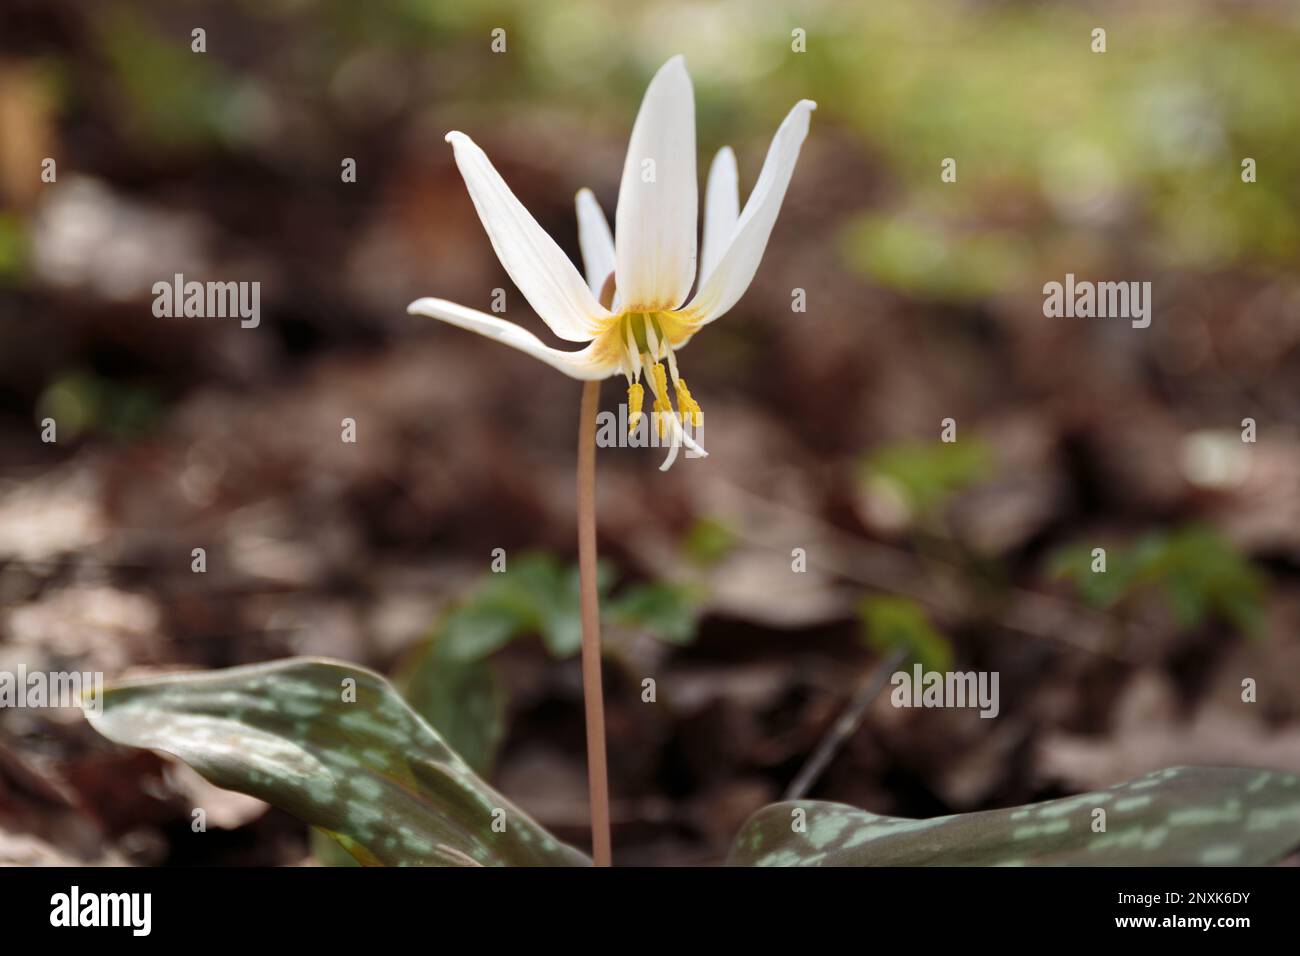 Erythronium.  Flower dens canis (viper grass) Siberian blooms in a meadow in spring. Dogtooth violet or the dog's tooth violet, late winter or early s Stock Photo